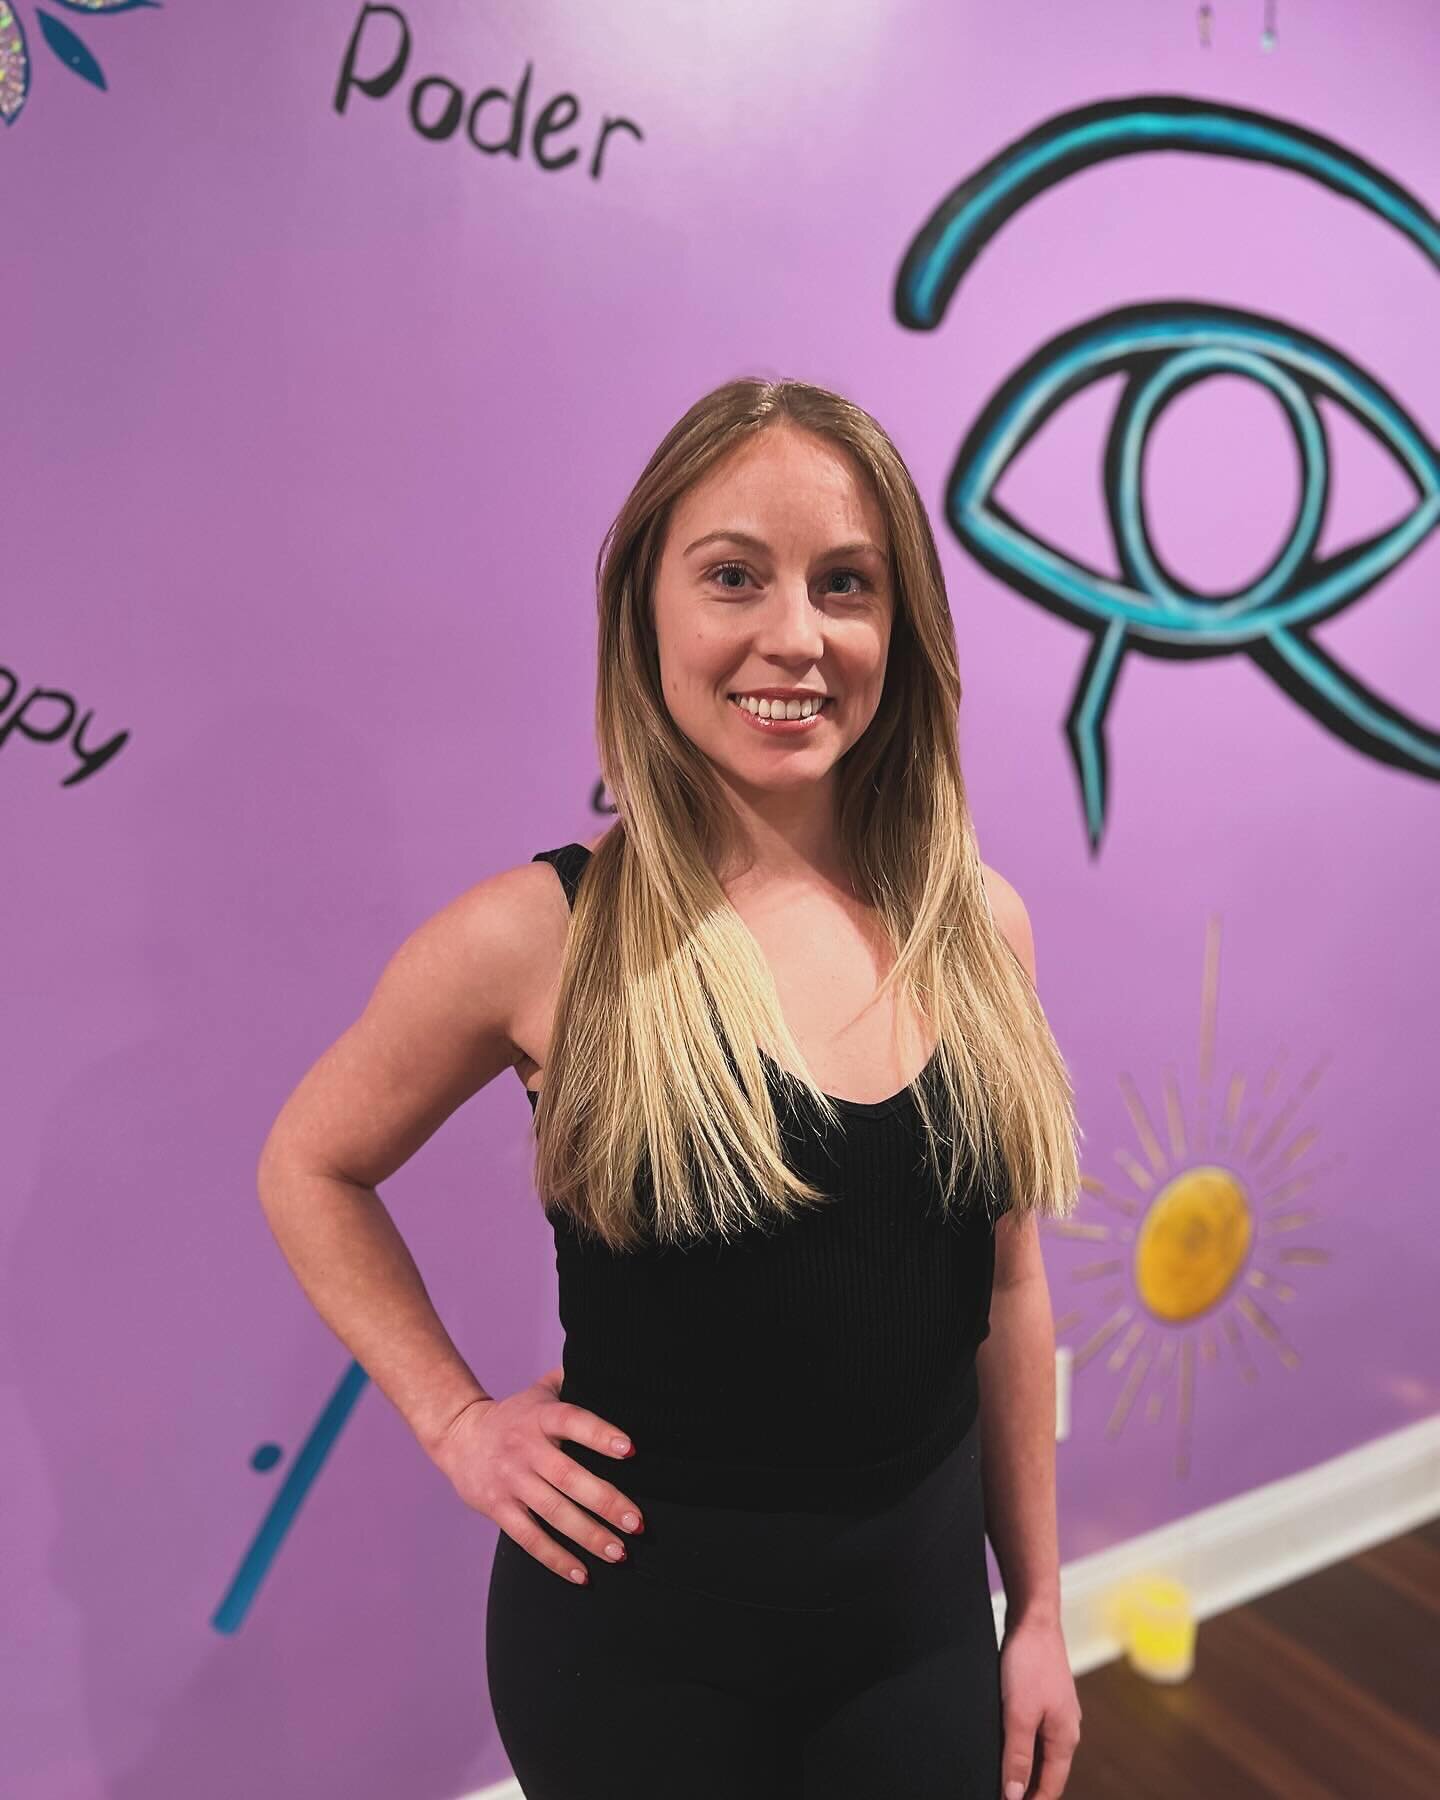 ✨This week&rsquo;s teacher feature✨

💜Annie 💜

✨ Hey I&rsquo;m Annie! I&rsquo;ve been a yogi for 15+ years and have been teaching yoga since graduating from my 200hr YTT at HYR in December 2022 and 40hr Yin YTT in April 2023. Yoga allows me to feel